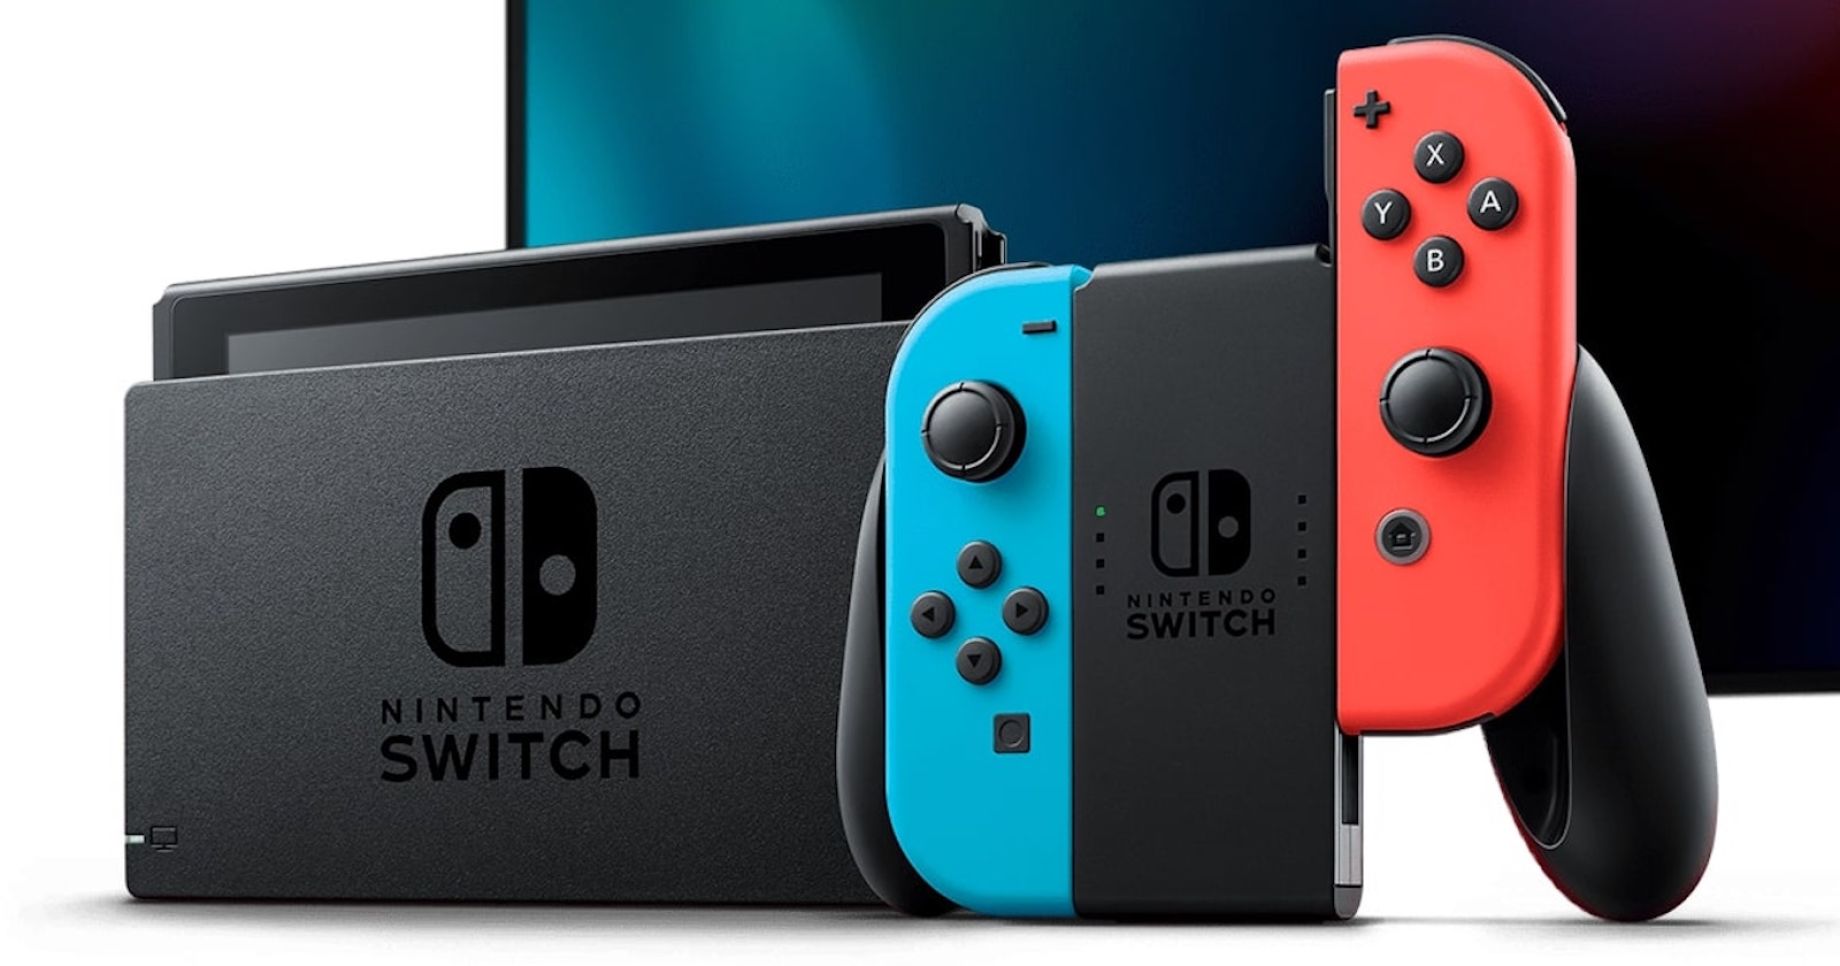 New Nintendo Switch? Activision Briefed On Next Gen Console By Nintendo,  Uncovered Documents Reveal